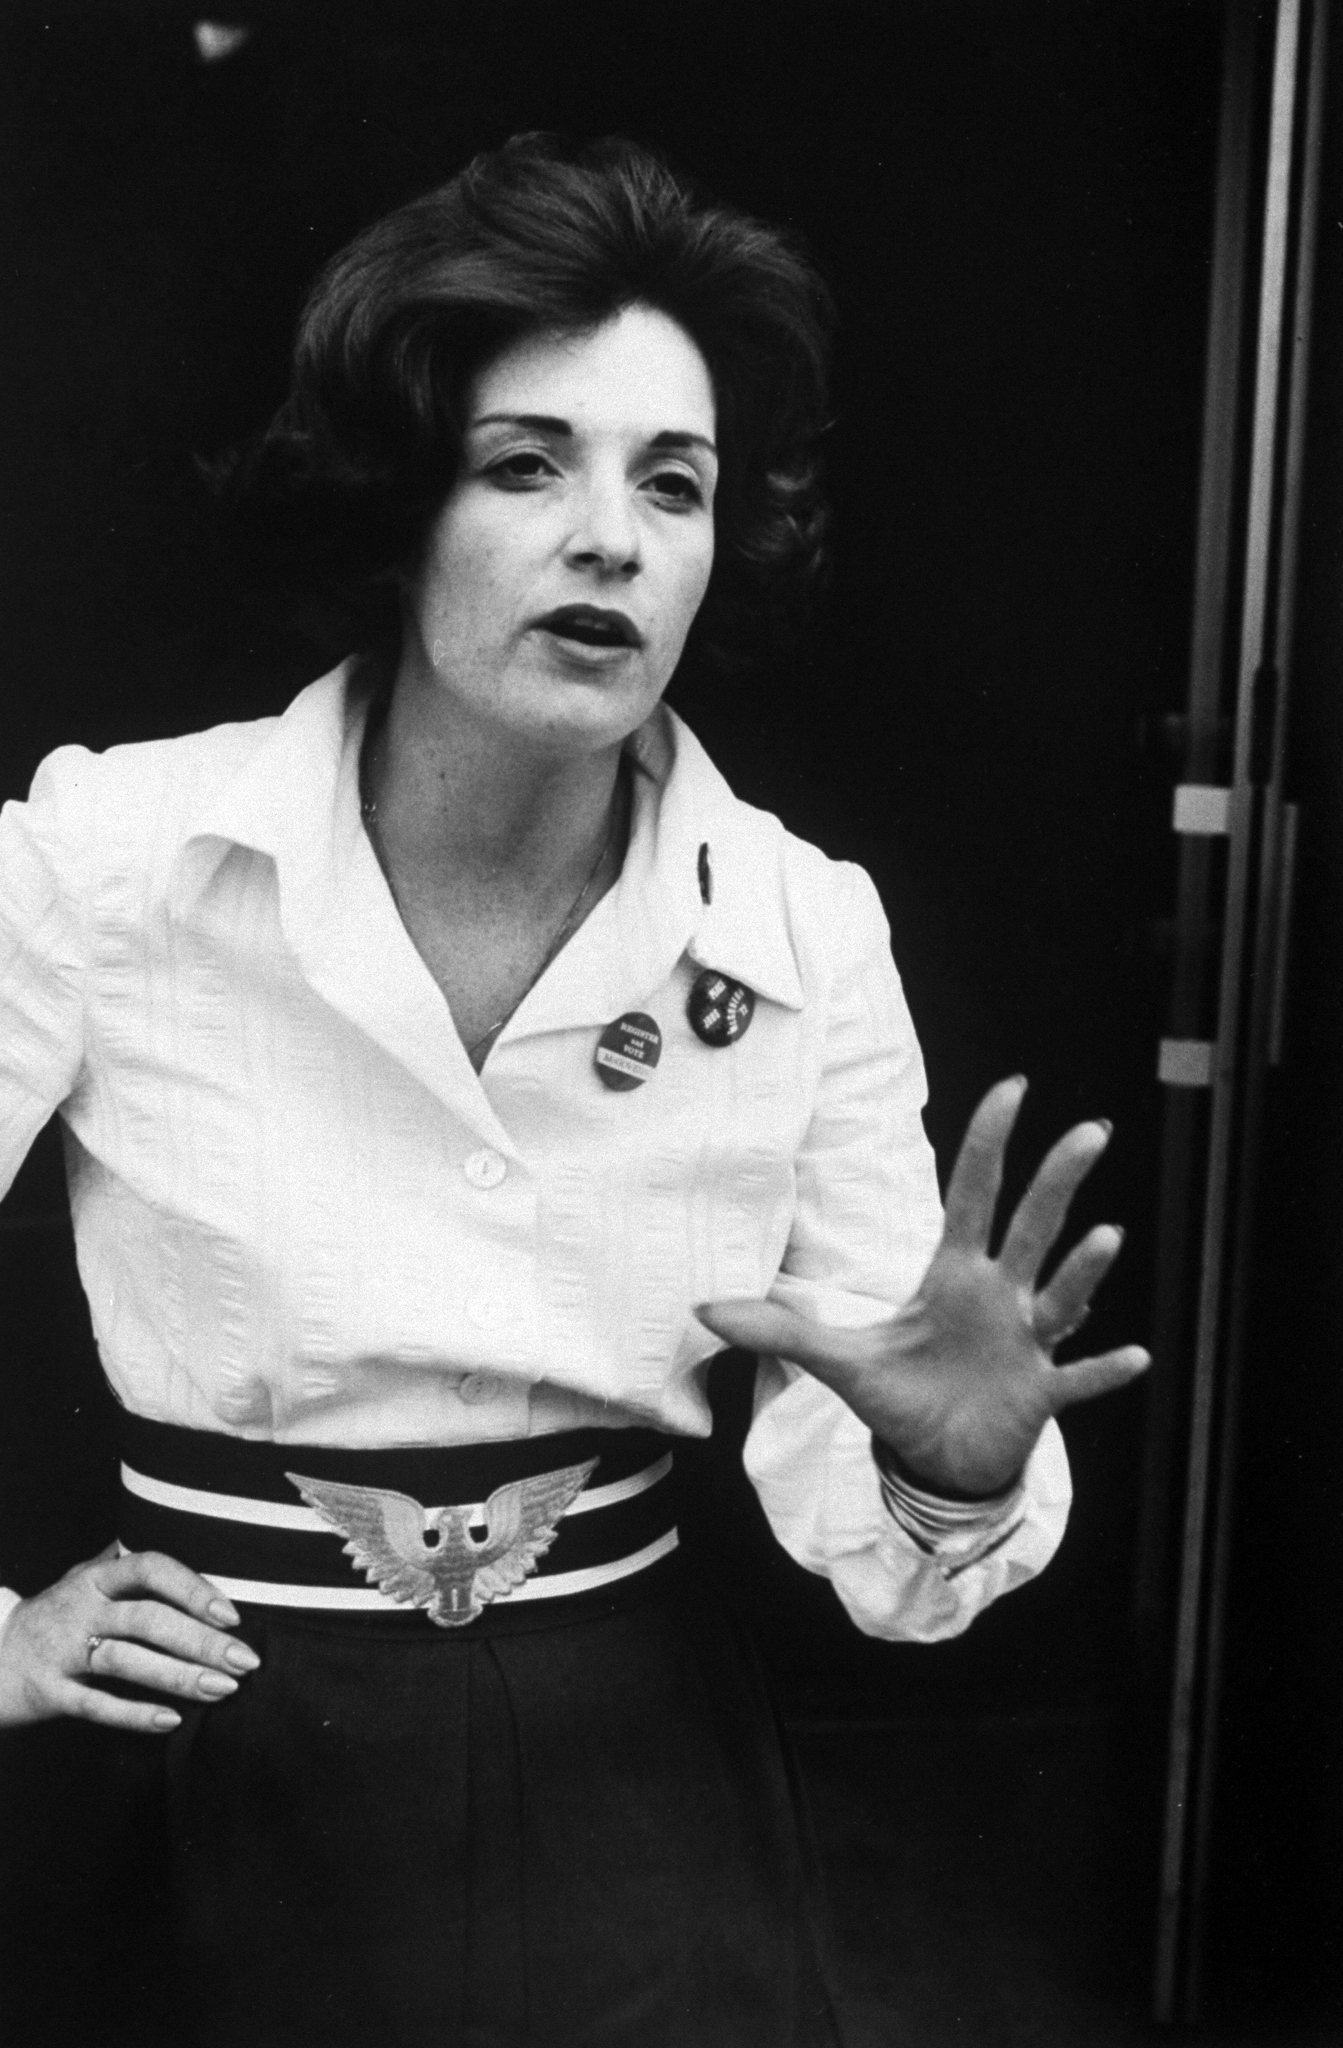 POW wife Valerie Kushner from a LIFE photo essay by Leonard McCombe in 1972.